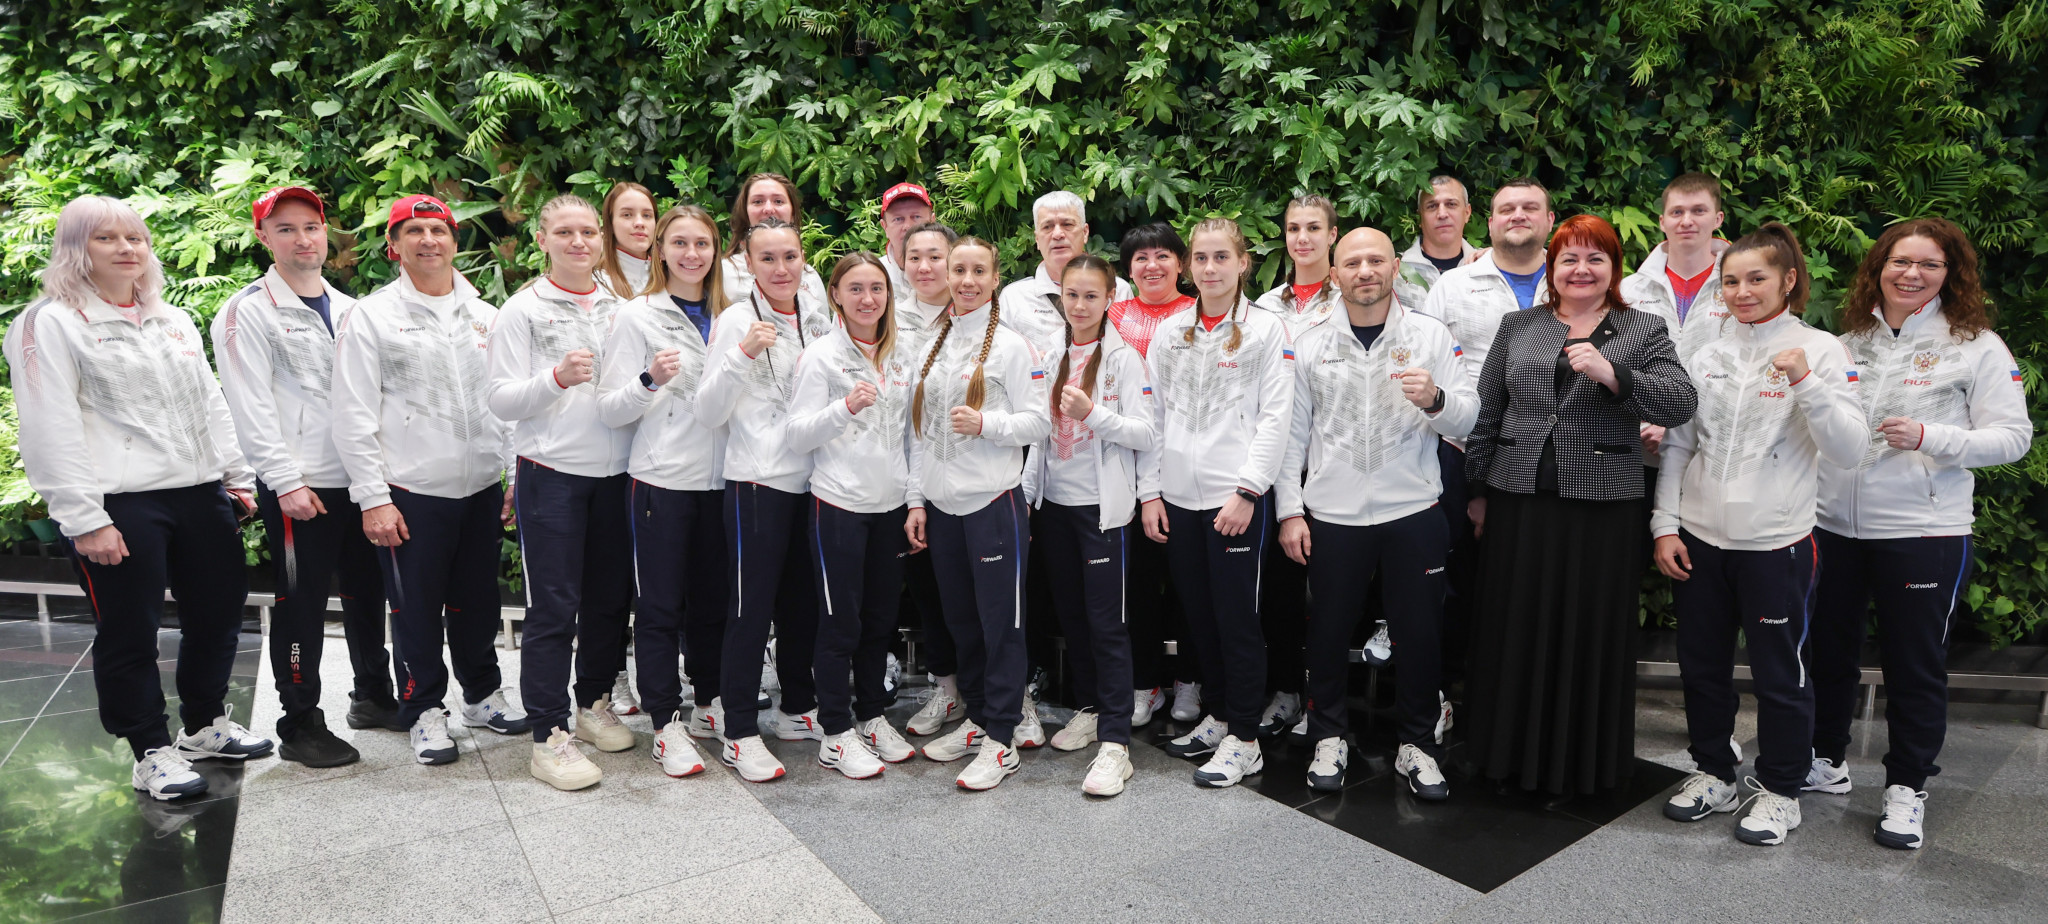 Russia send 12-strong team to fly flag at IBA Women's World Championships